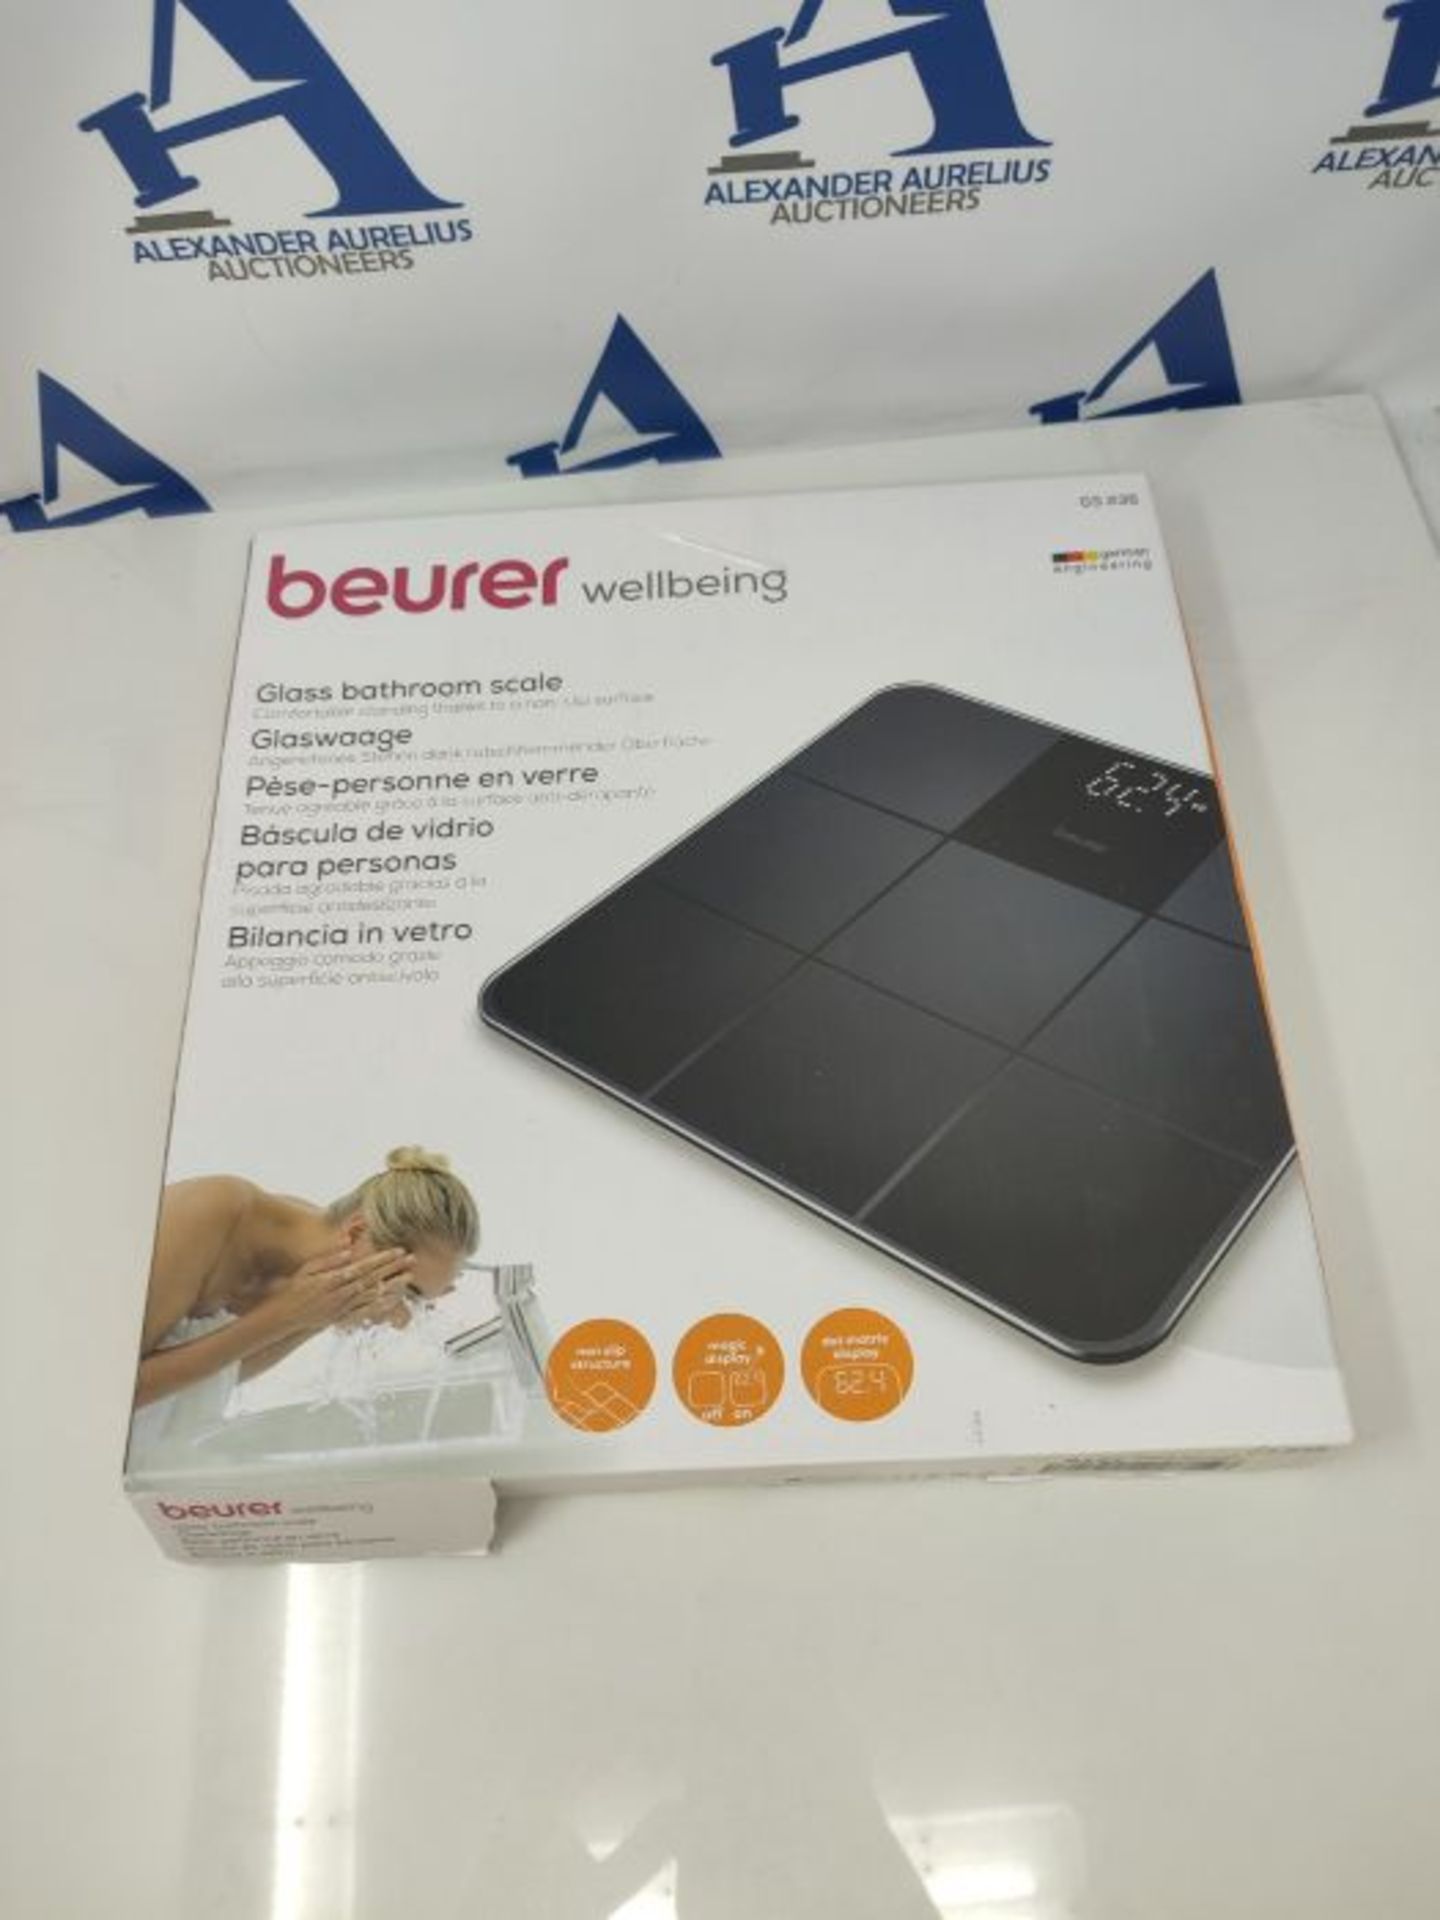 Beurer GS235 Bathroom Scale with Sleek Non-Slip Tile Effect Surface - Image 2 of 3